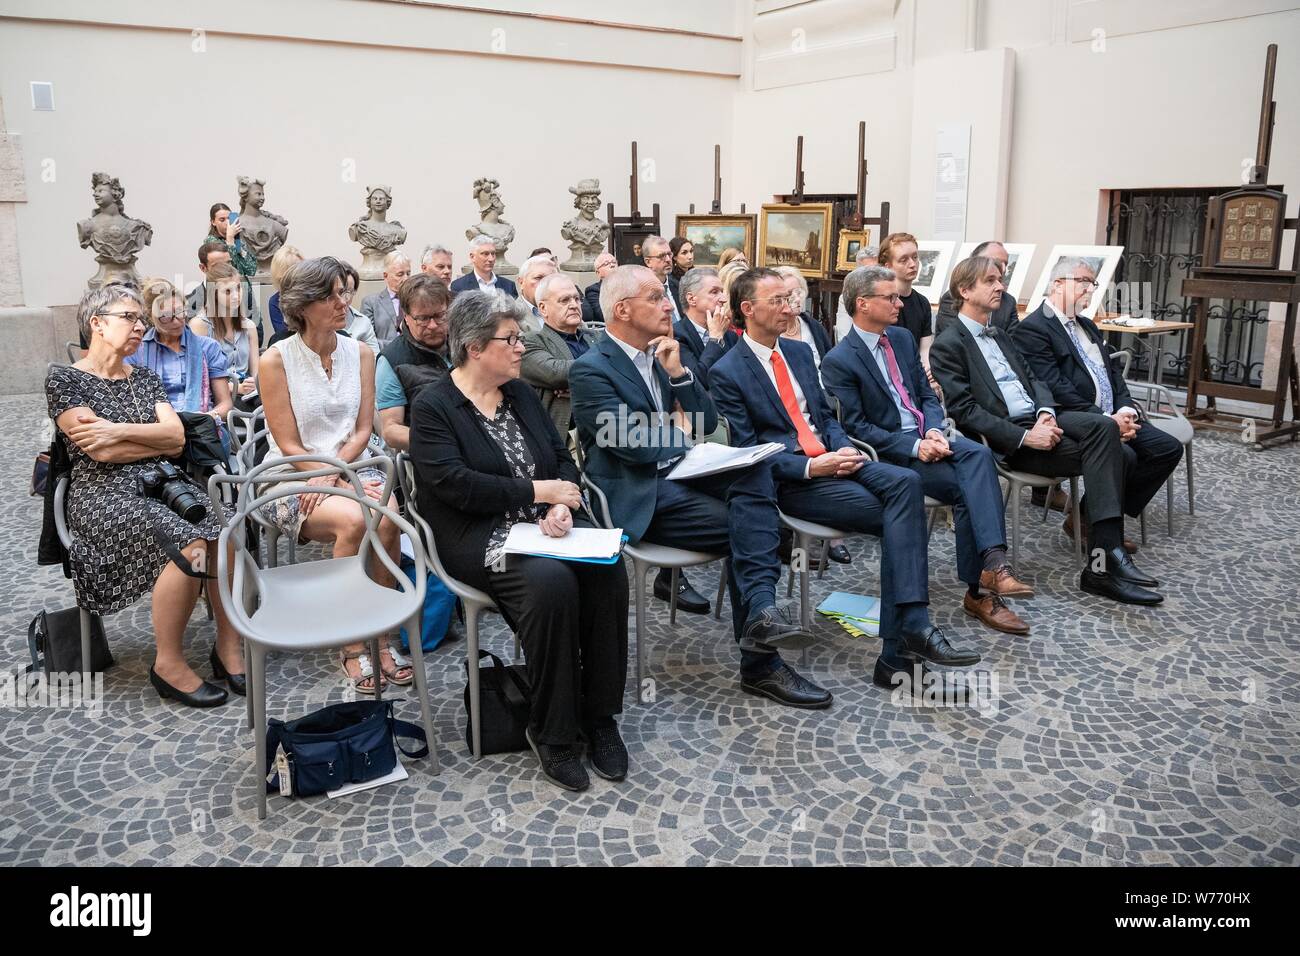 Munich, Germany. 05th Aug, 2019. Participants in the event for the restitution of nine Nazi looted works of art sit in the courtyard of the Bavarian National Museum. Five paintings, three colour engravings and a wooden panel had been confiscated by the Gestapo in November 1938. The Munich collections have now returned the works to the heirs of Julius and Simone Davidsohn from Munich. Credit: Sina Schuldt/dpa/Alamy Live News Stock Photo